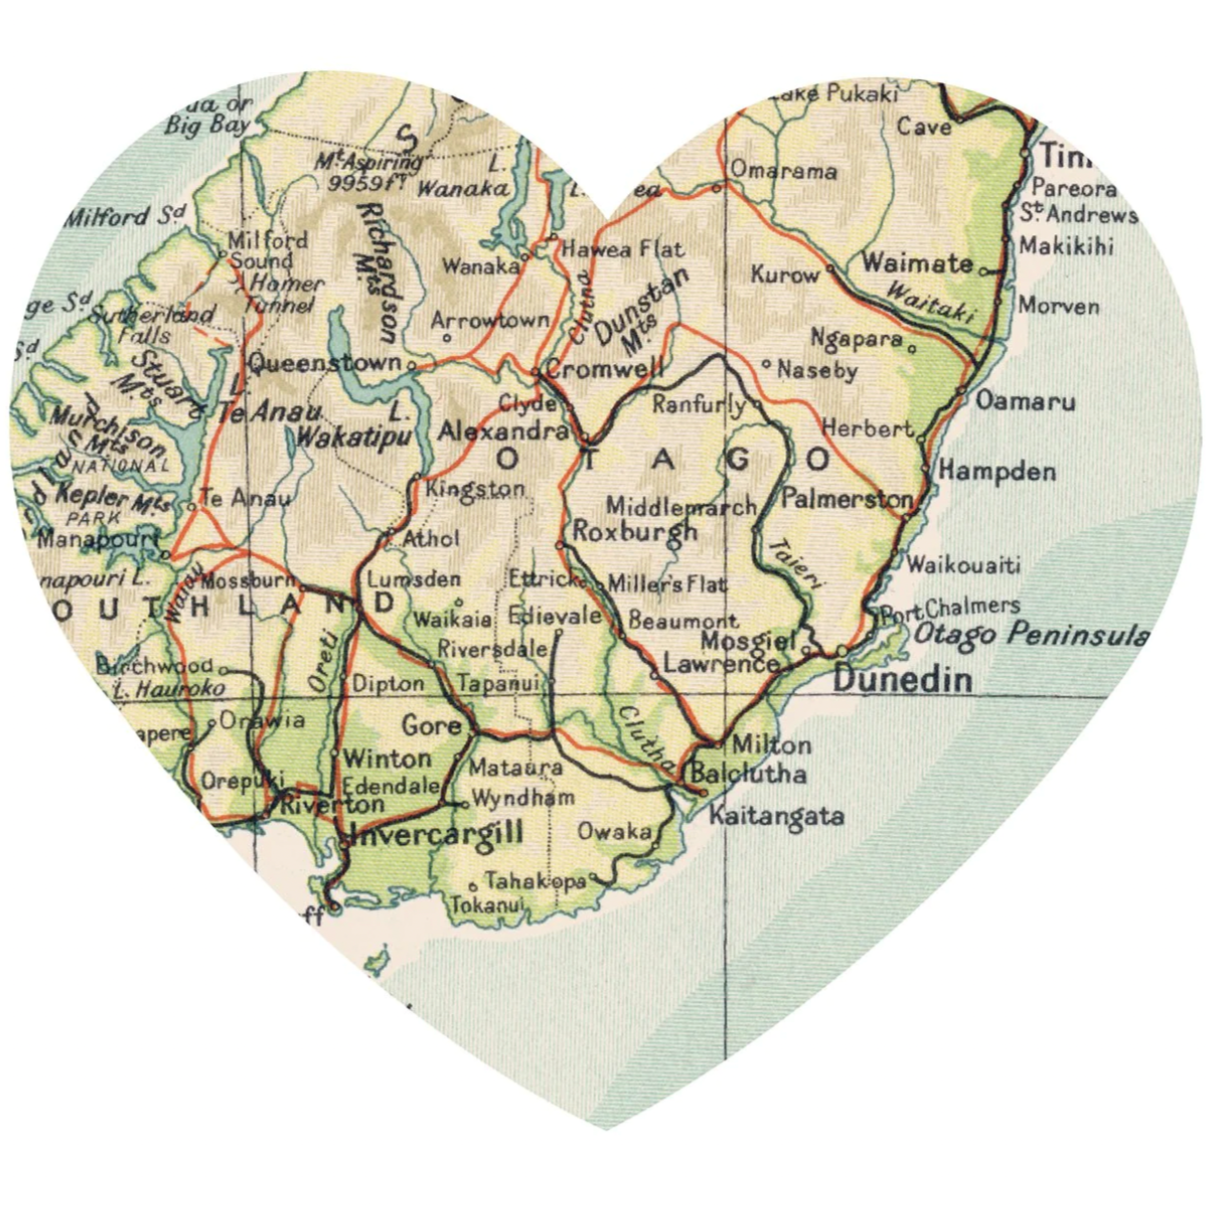 Large Heart Shape New Zealand Map - Removable Sticker